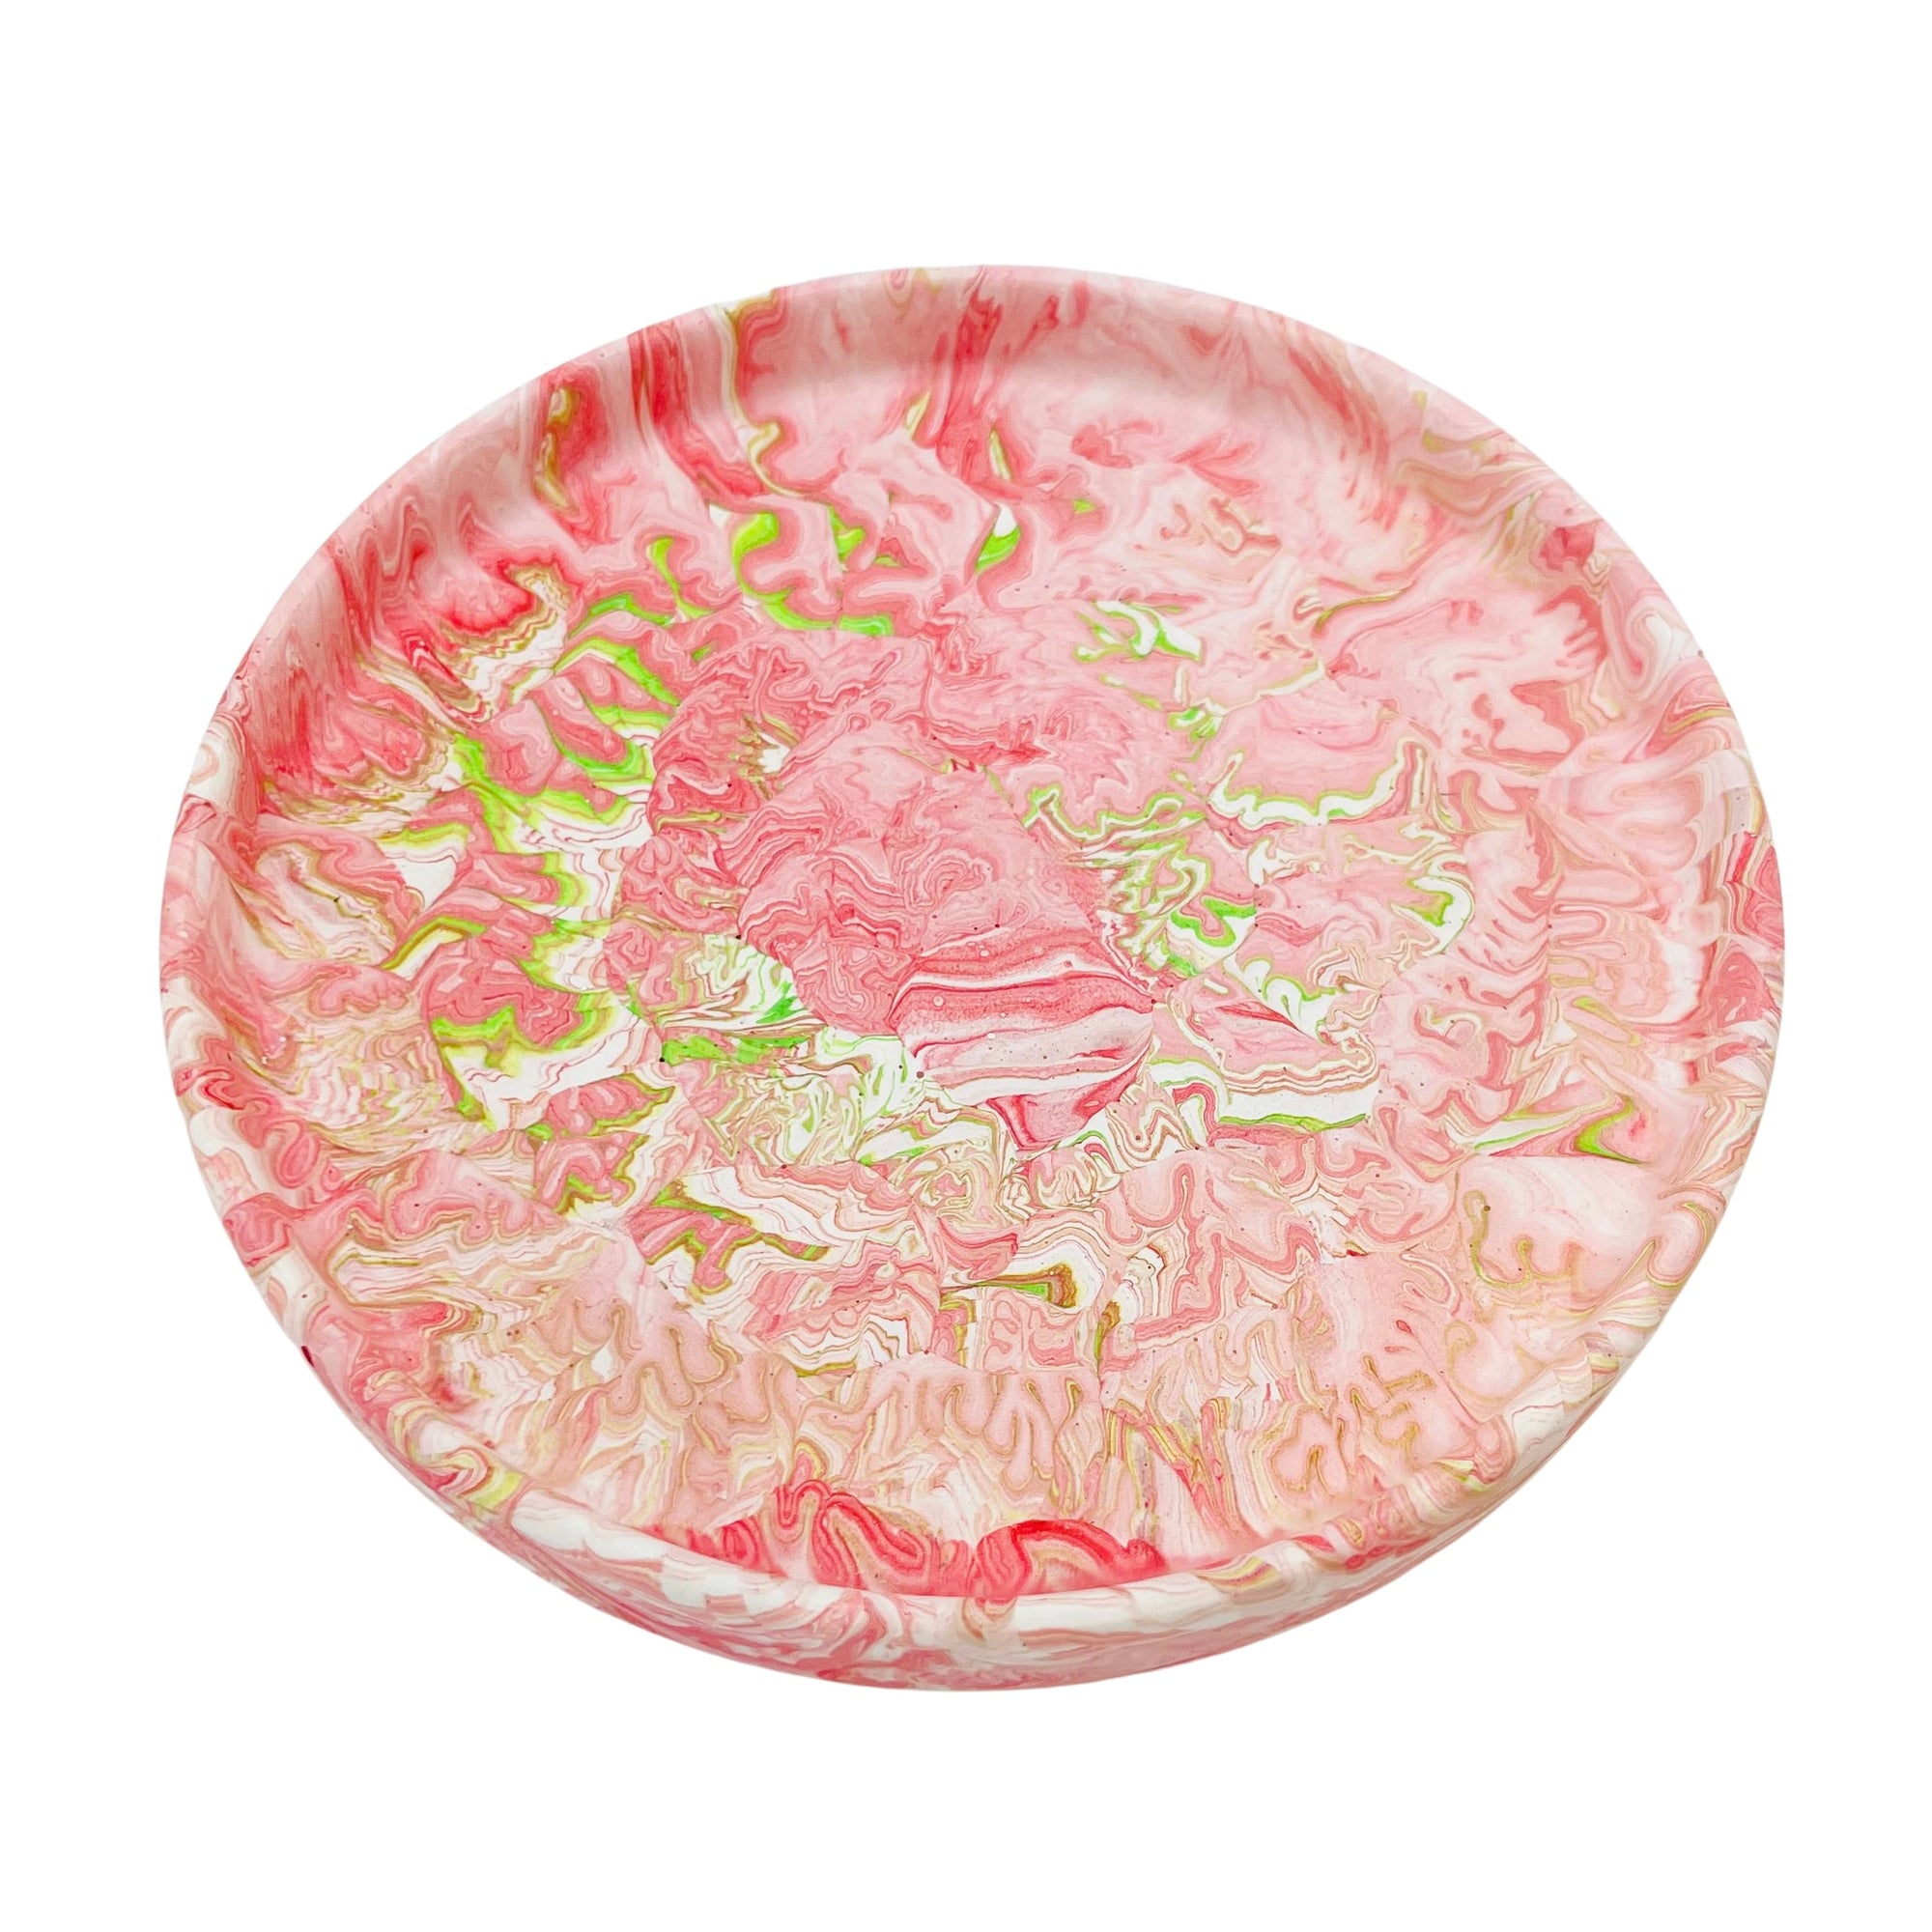 A circular Jesmonite trinket tray measuring 15.4cm in diameter marbled with coral and lime green pigment.